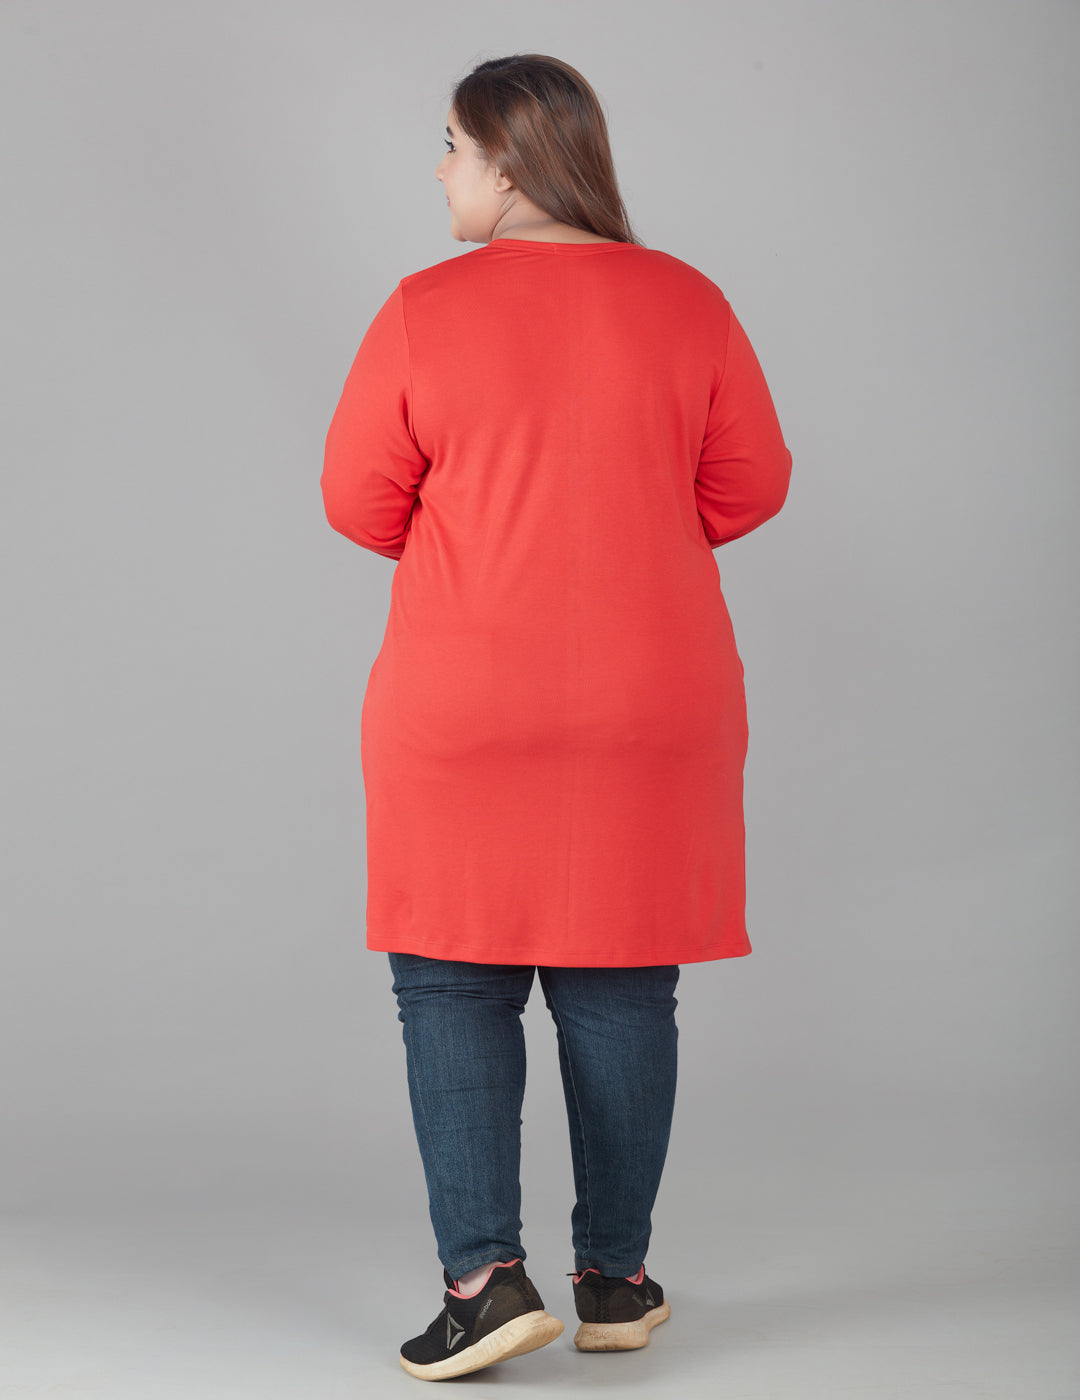 Stylish Red Cotton Full Sleeves Long Tops For Women in Plus Size at best prices